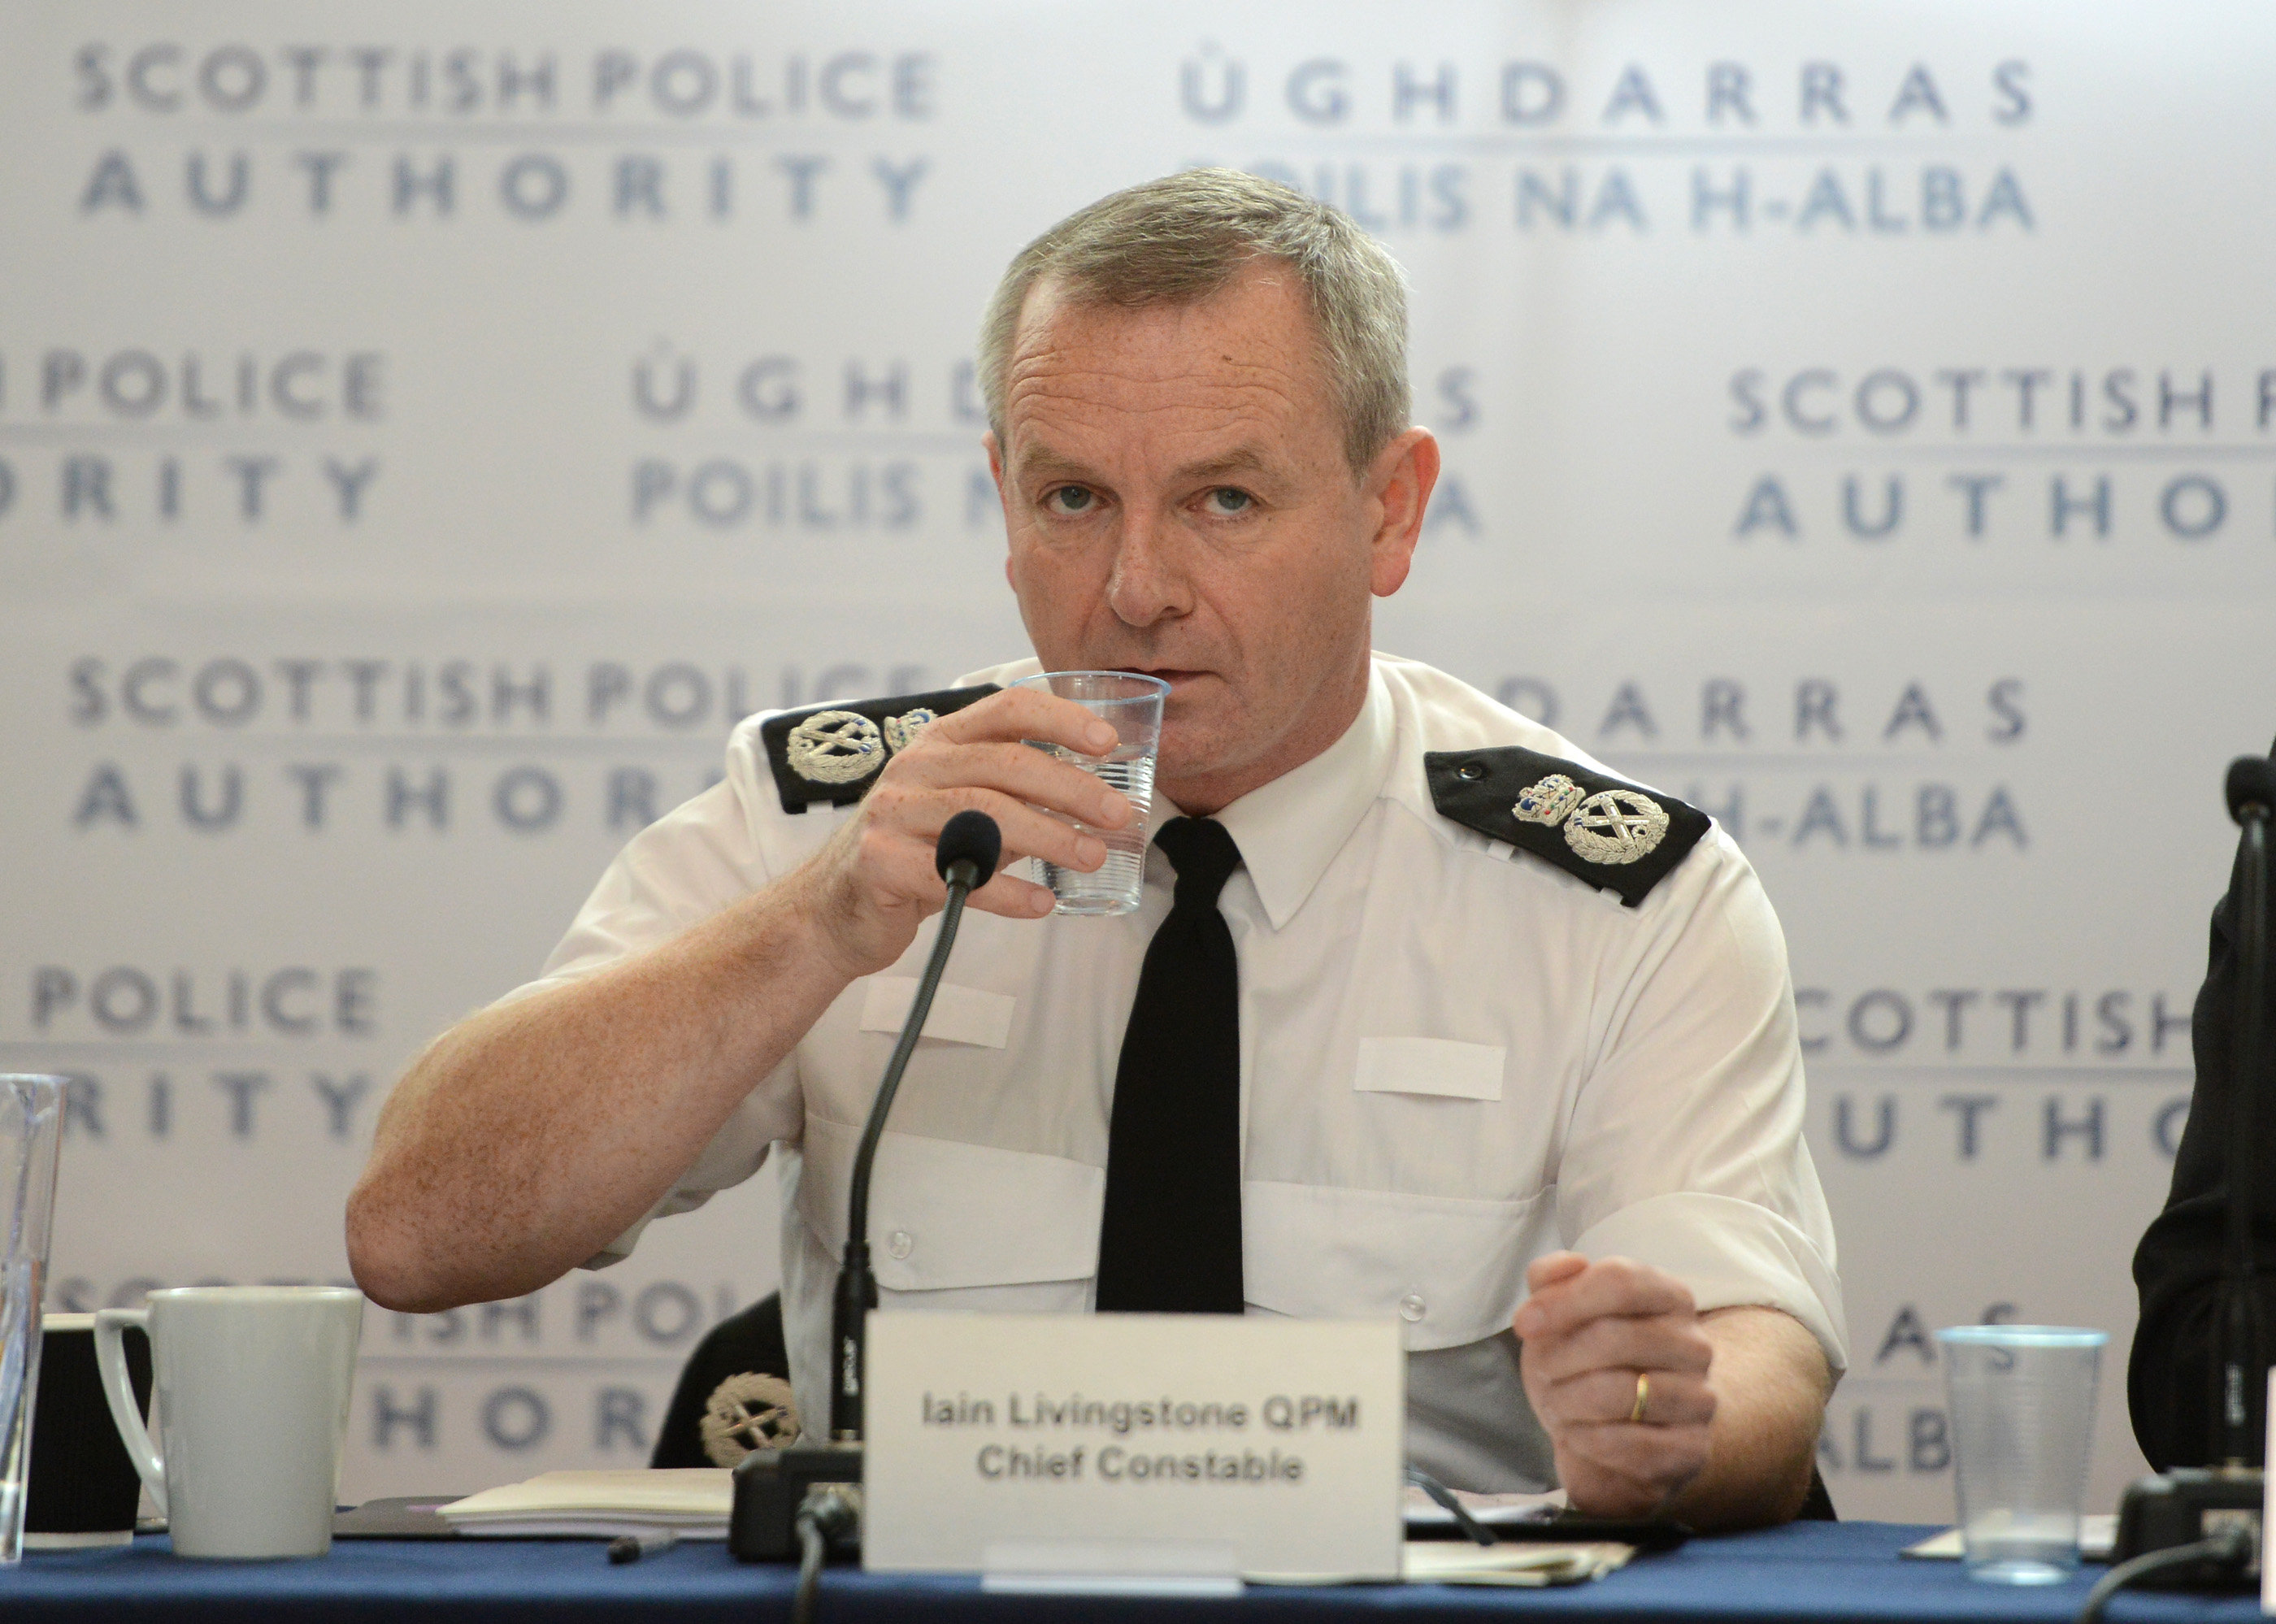 The  new Chief Constable of Police Scotland Iain Livingstone attends his first Scottish Police Authority meeting at Maryhill Burgh Halls in Glasgow after taking over the force.